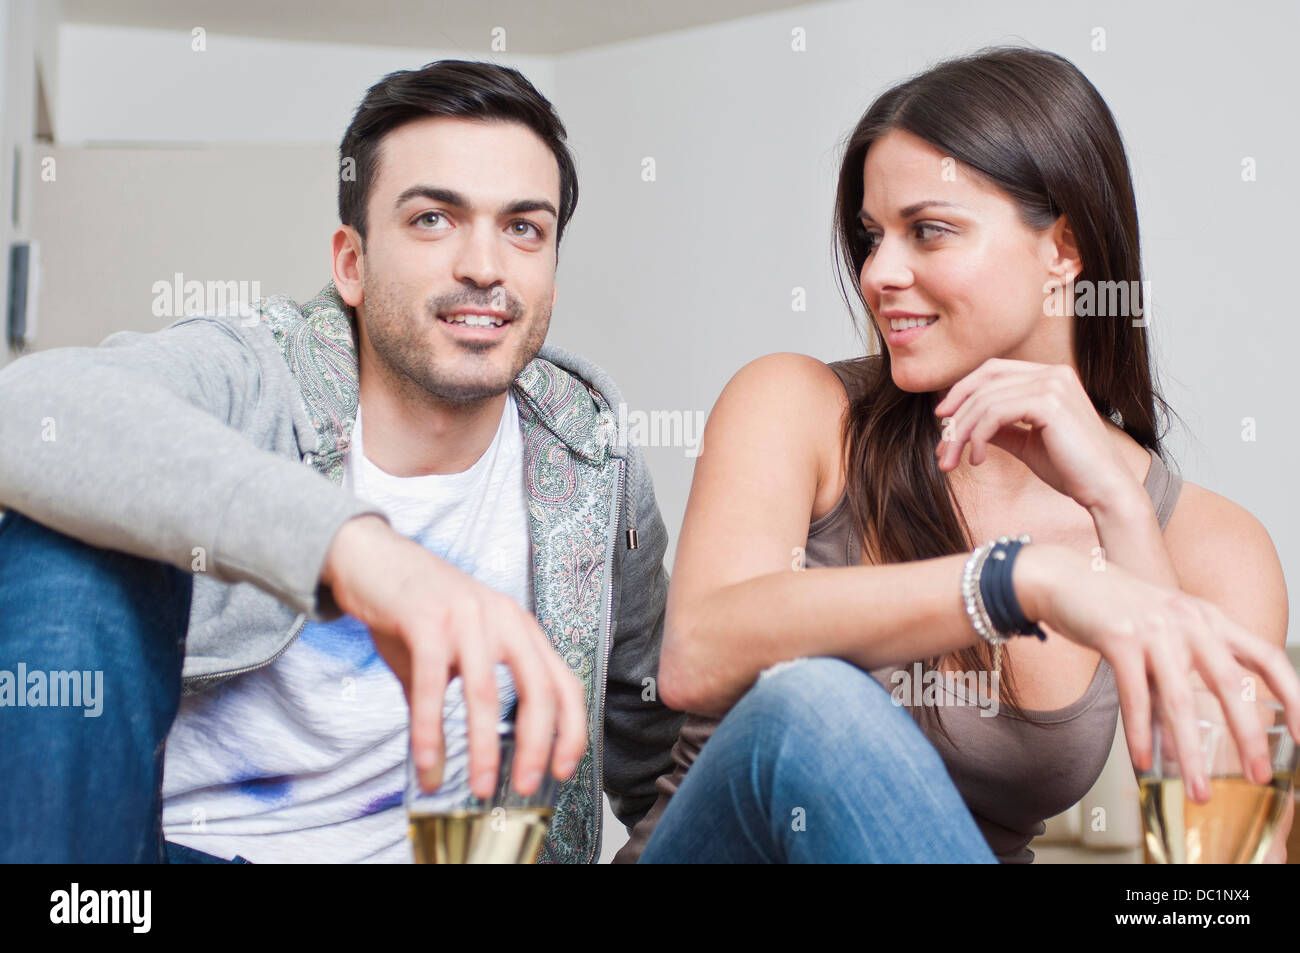 Young couple sitting down sharing glass of wine Stock Photo